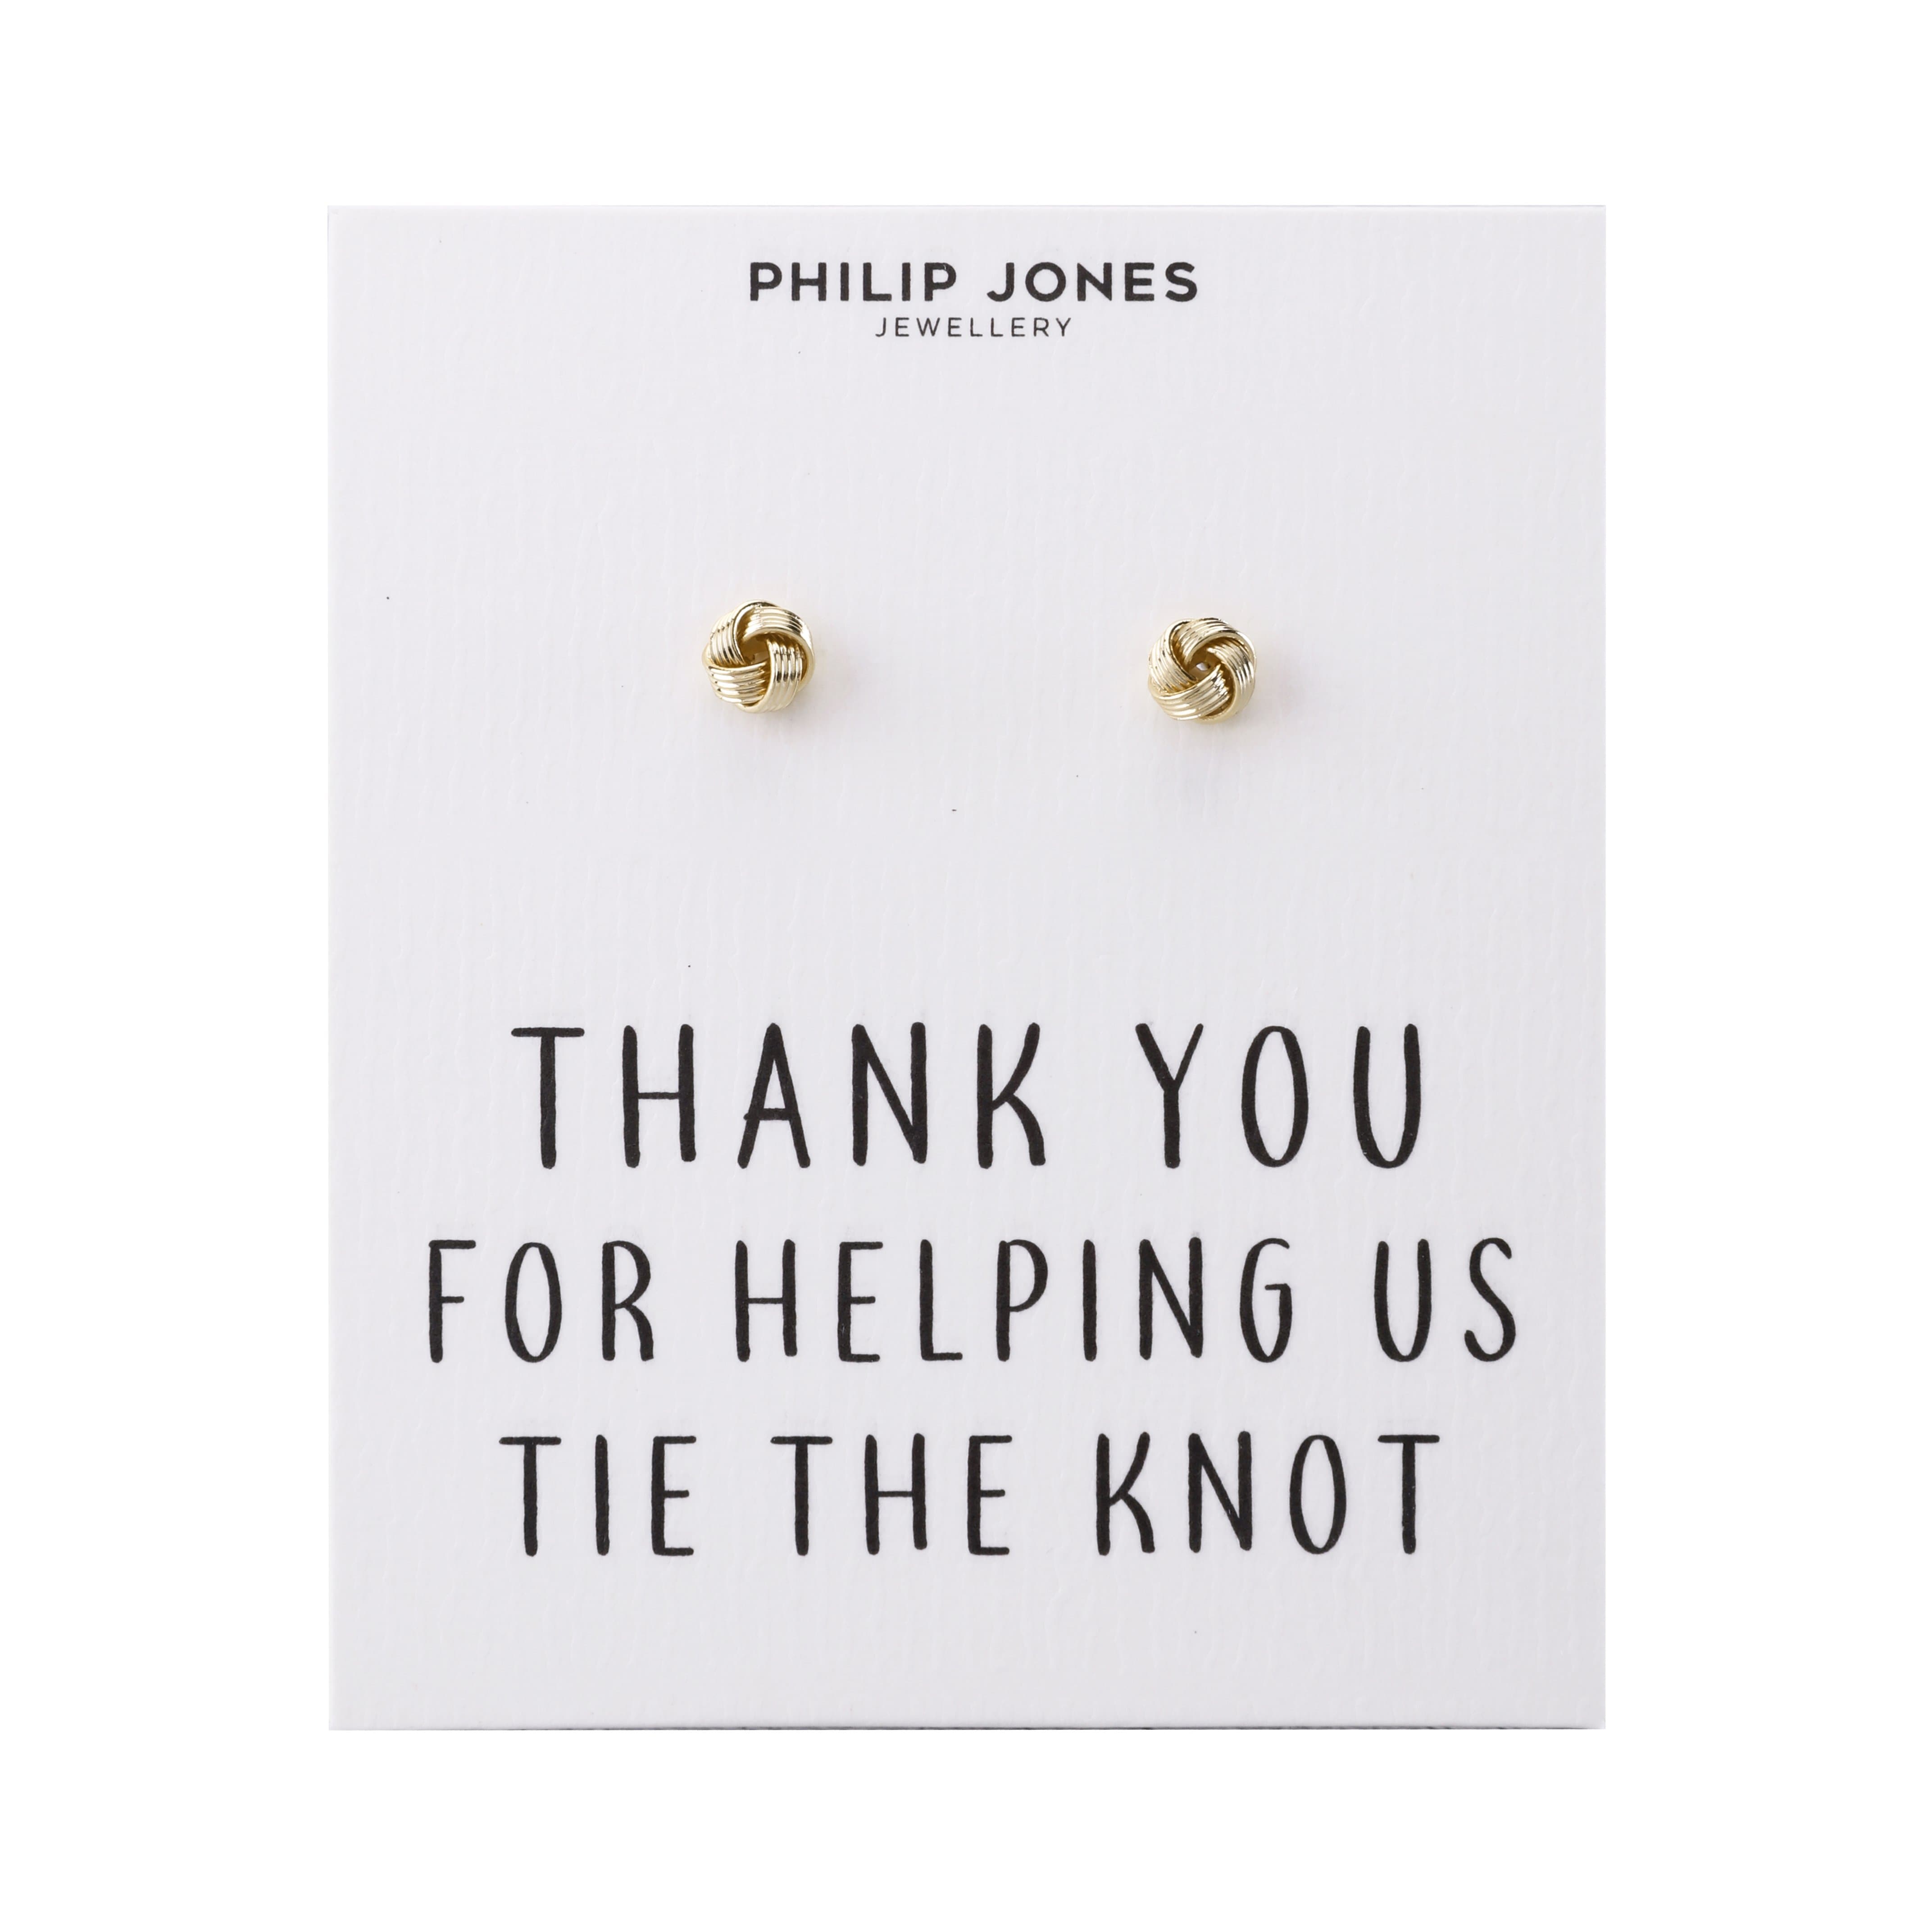 Gold Plated Thank You for Helping us Tie The Knot Earrings with Quote Card by Philip Jones Jewellery